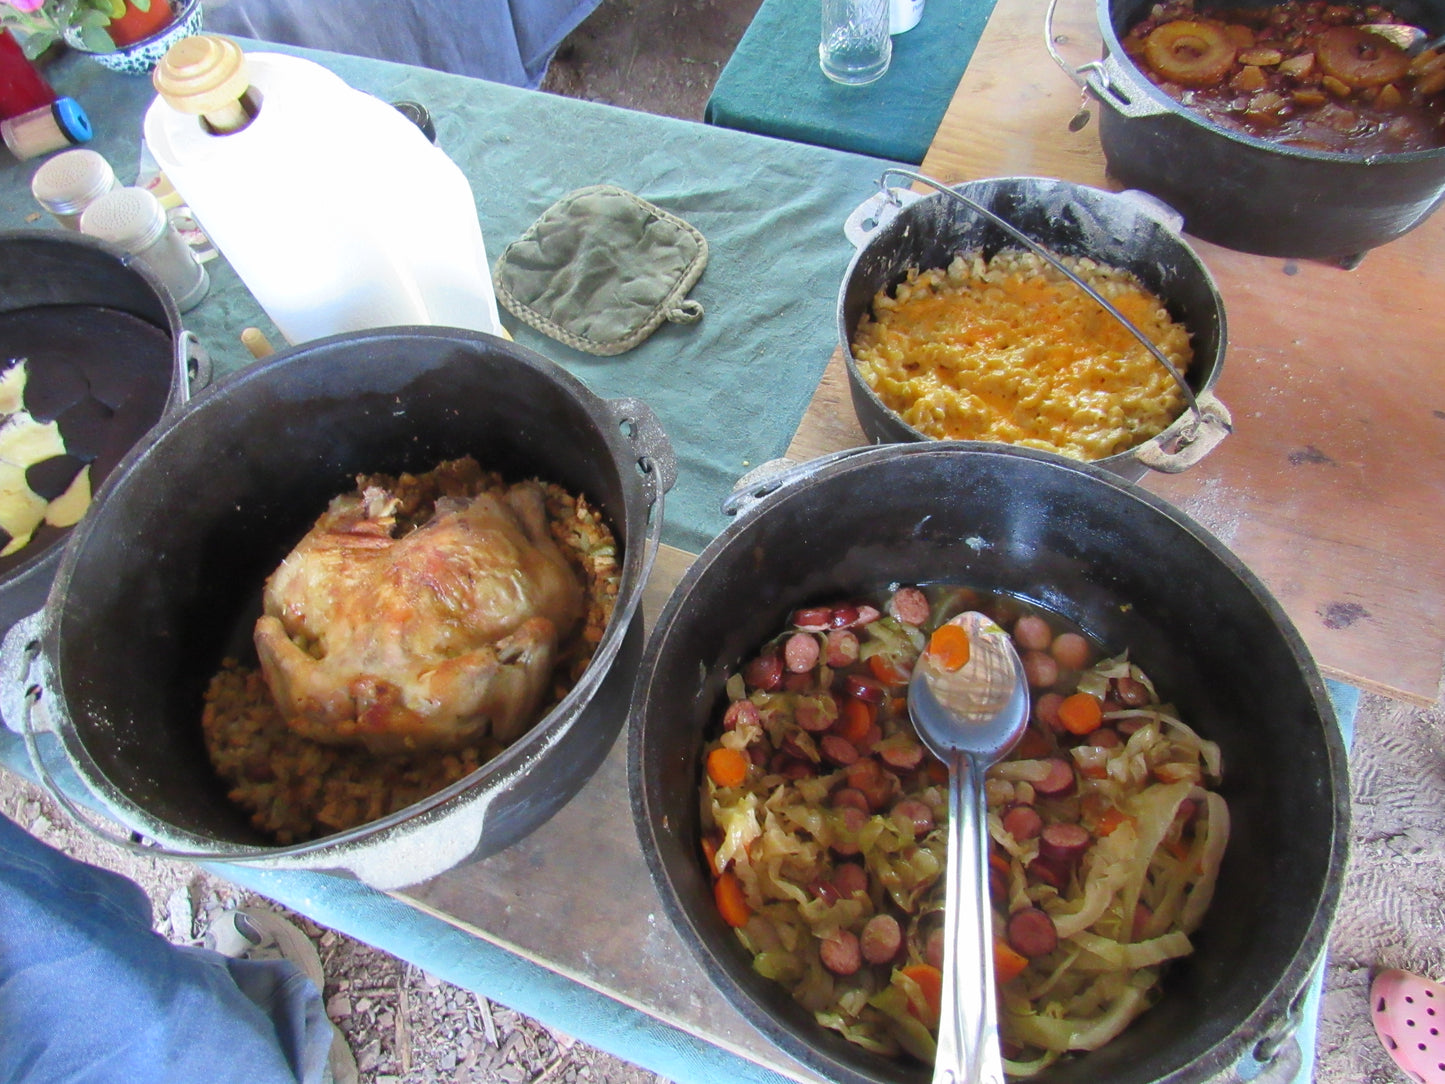 June 8th - Outdoor Cast Iron Dutch Oven Cooking CLASS